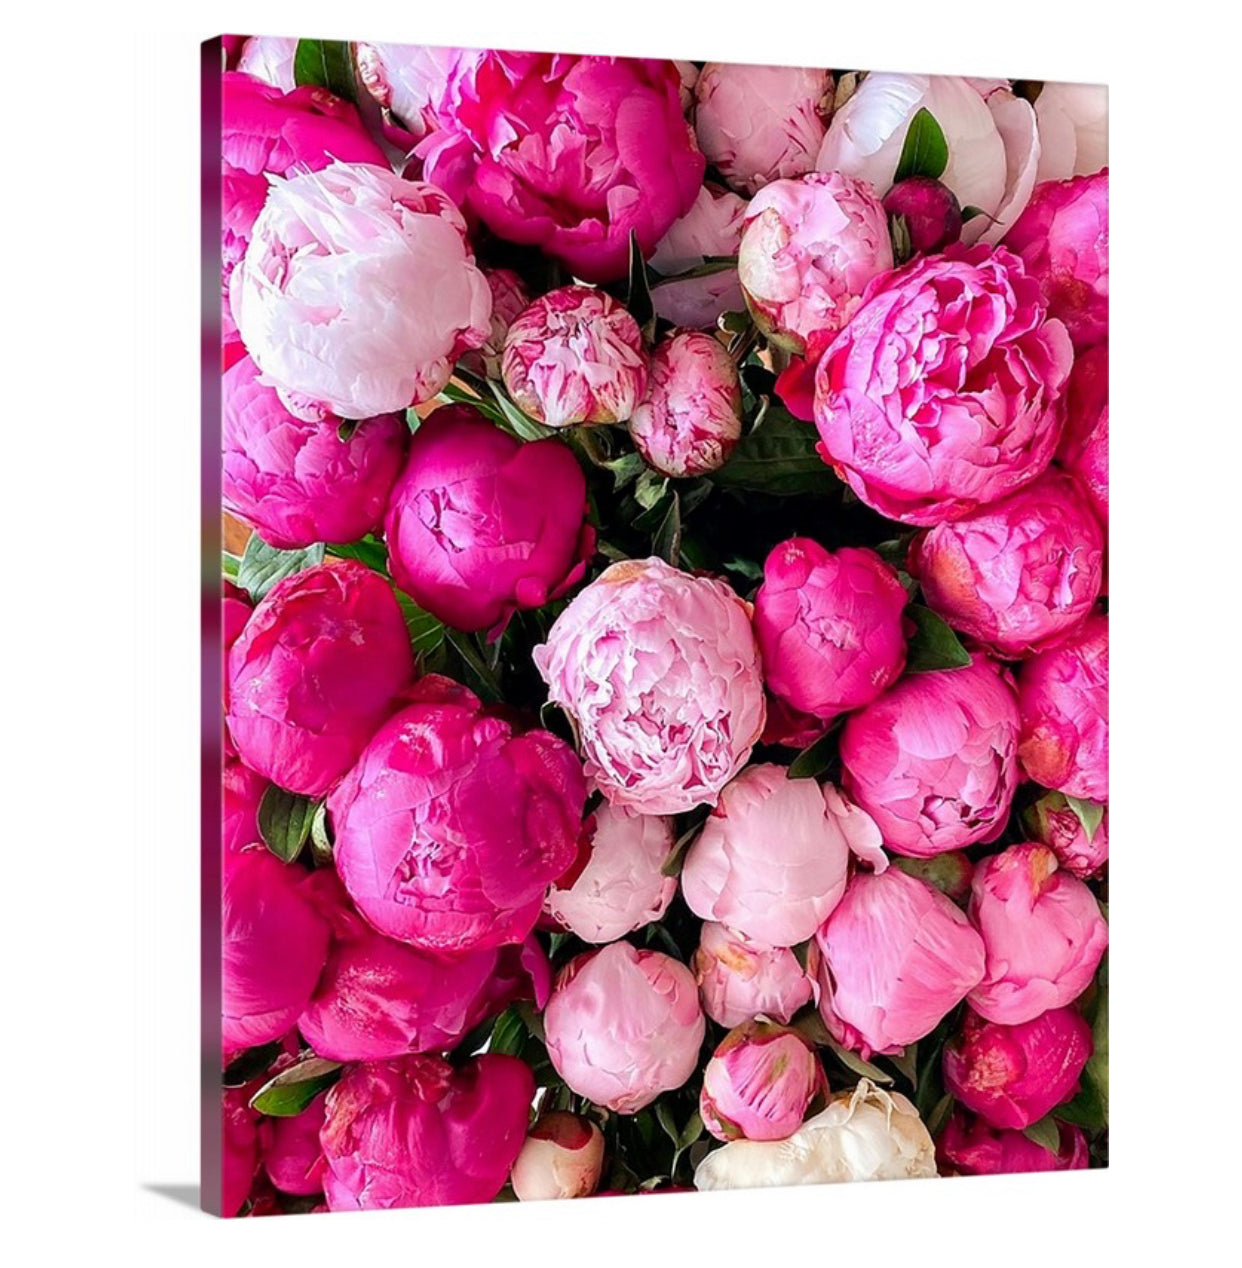 Budded Pink Peonies Gallery Wrapped Canvas